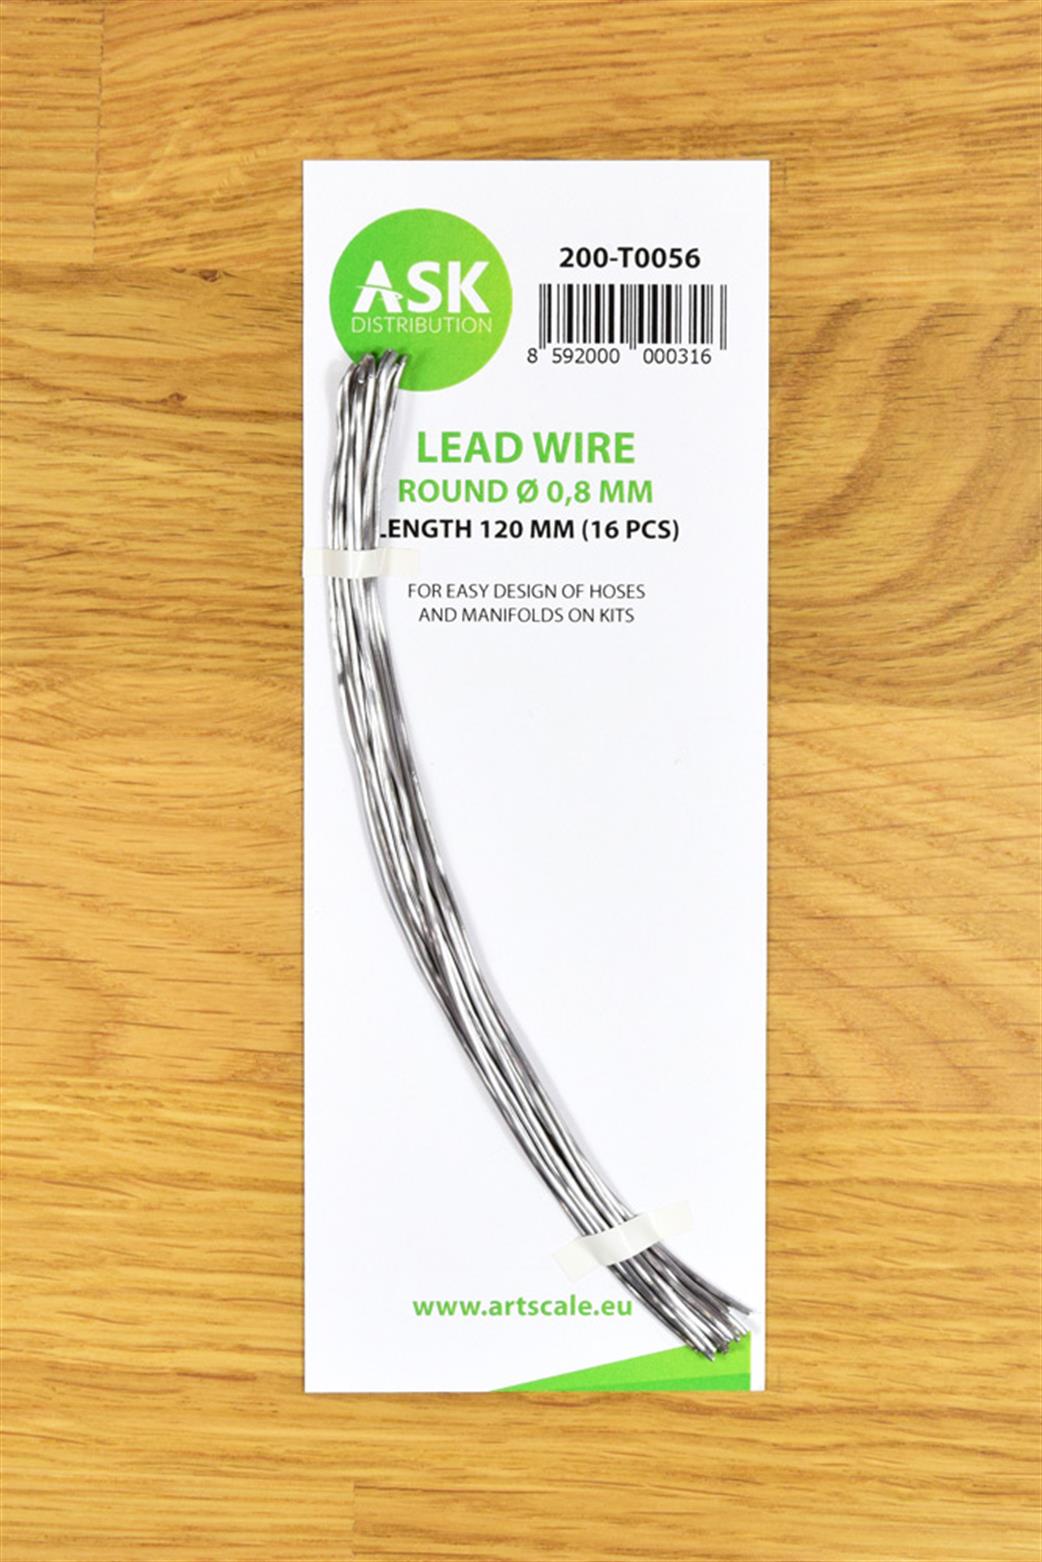 Ask Distribution 200-T0056 Lead Wire .8mm Round x 120mm 30 Pieces